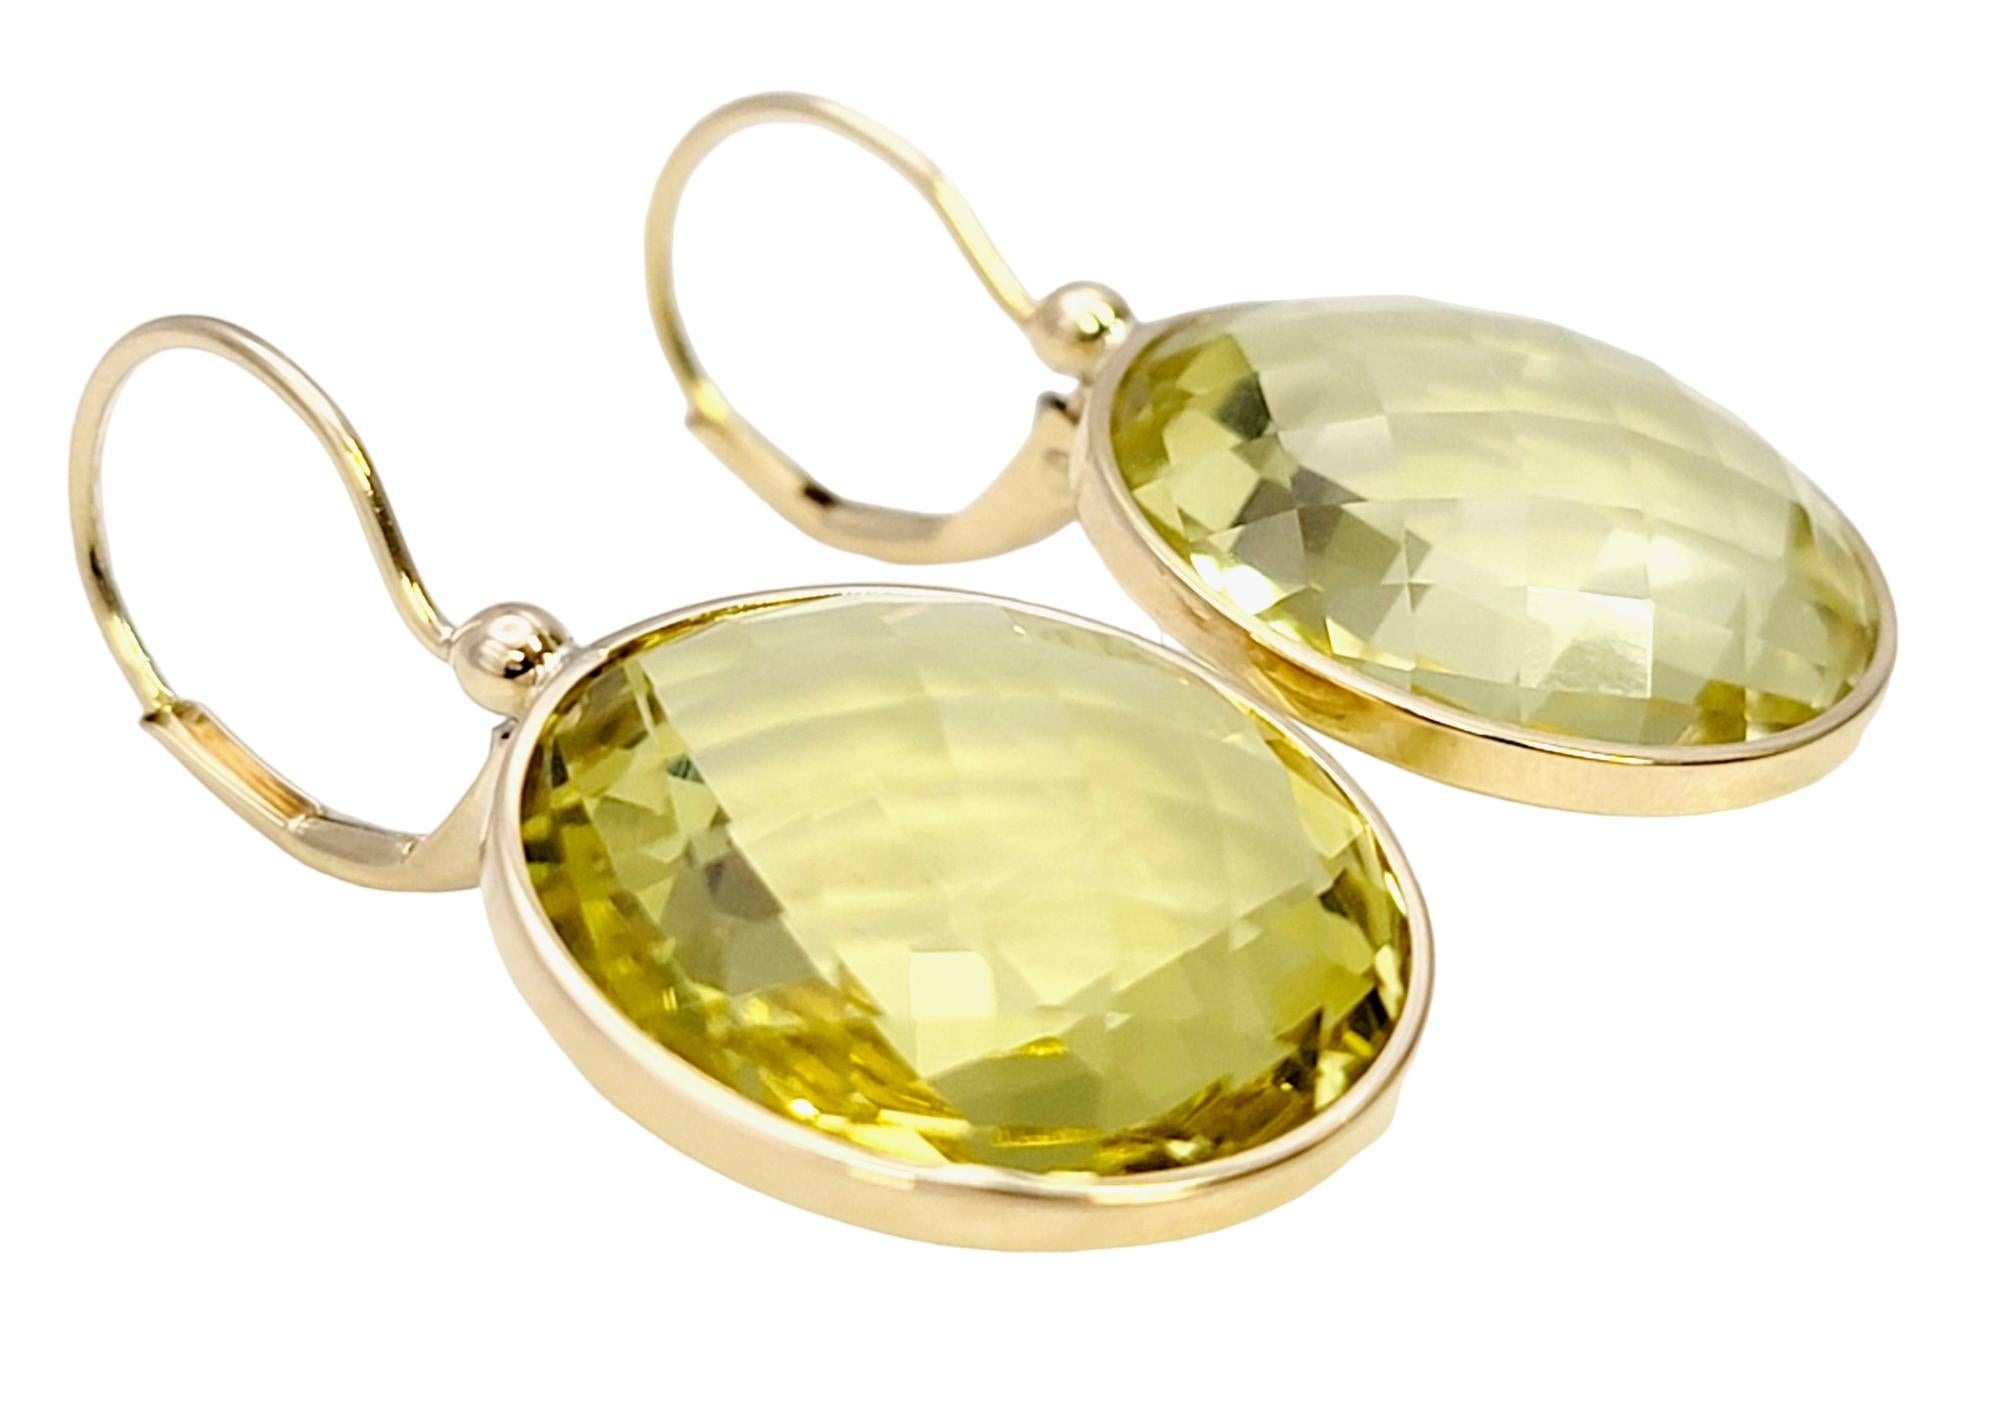 We absolutely adore these bright and beautiful citrine earrings! They have a simple yet elegant design and the perfect pop of cheerful color. 

These modern beauties each feature a single round checkerboard cut citrine stone bezel set in polished 14